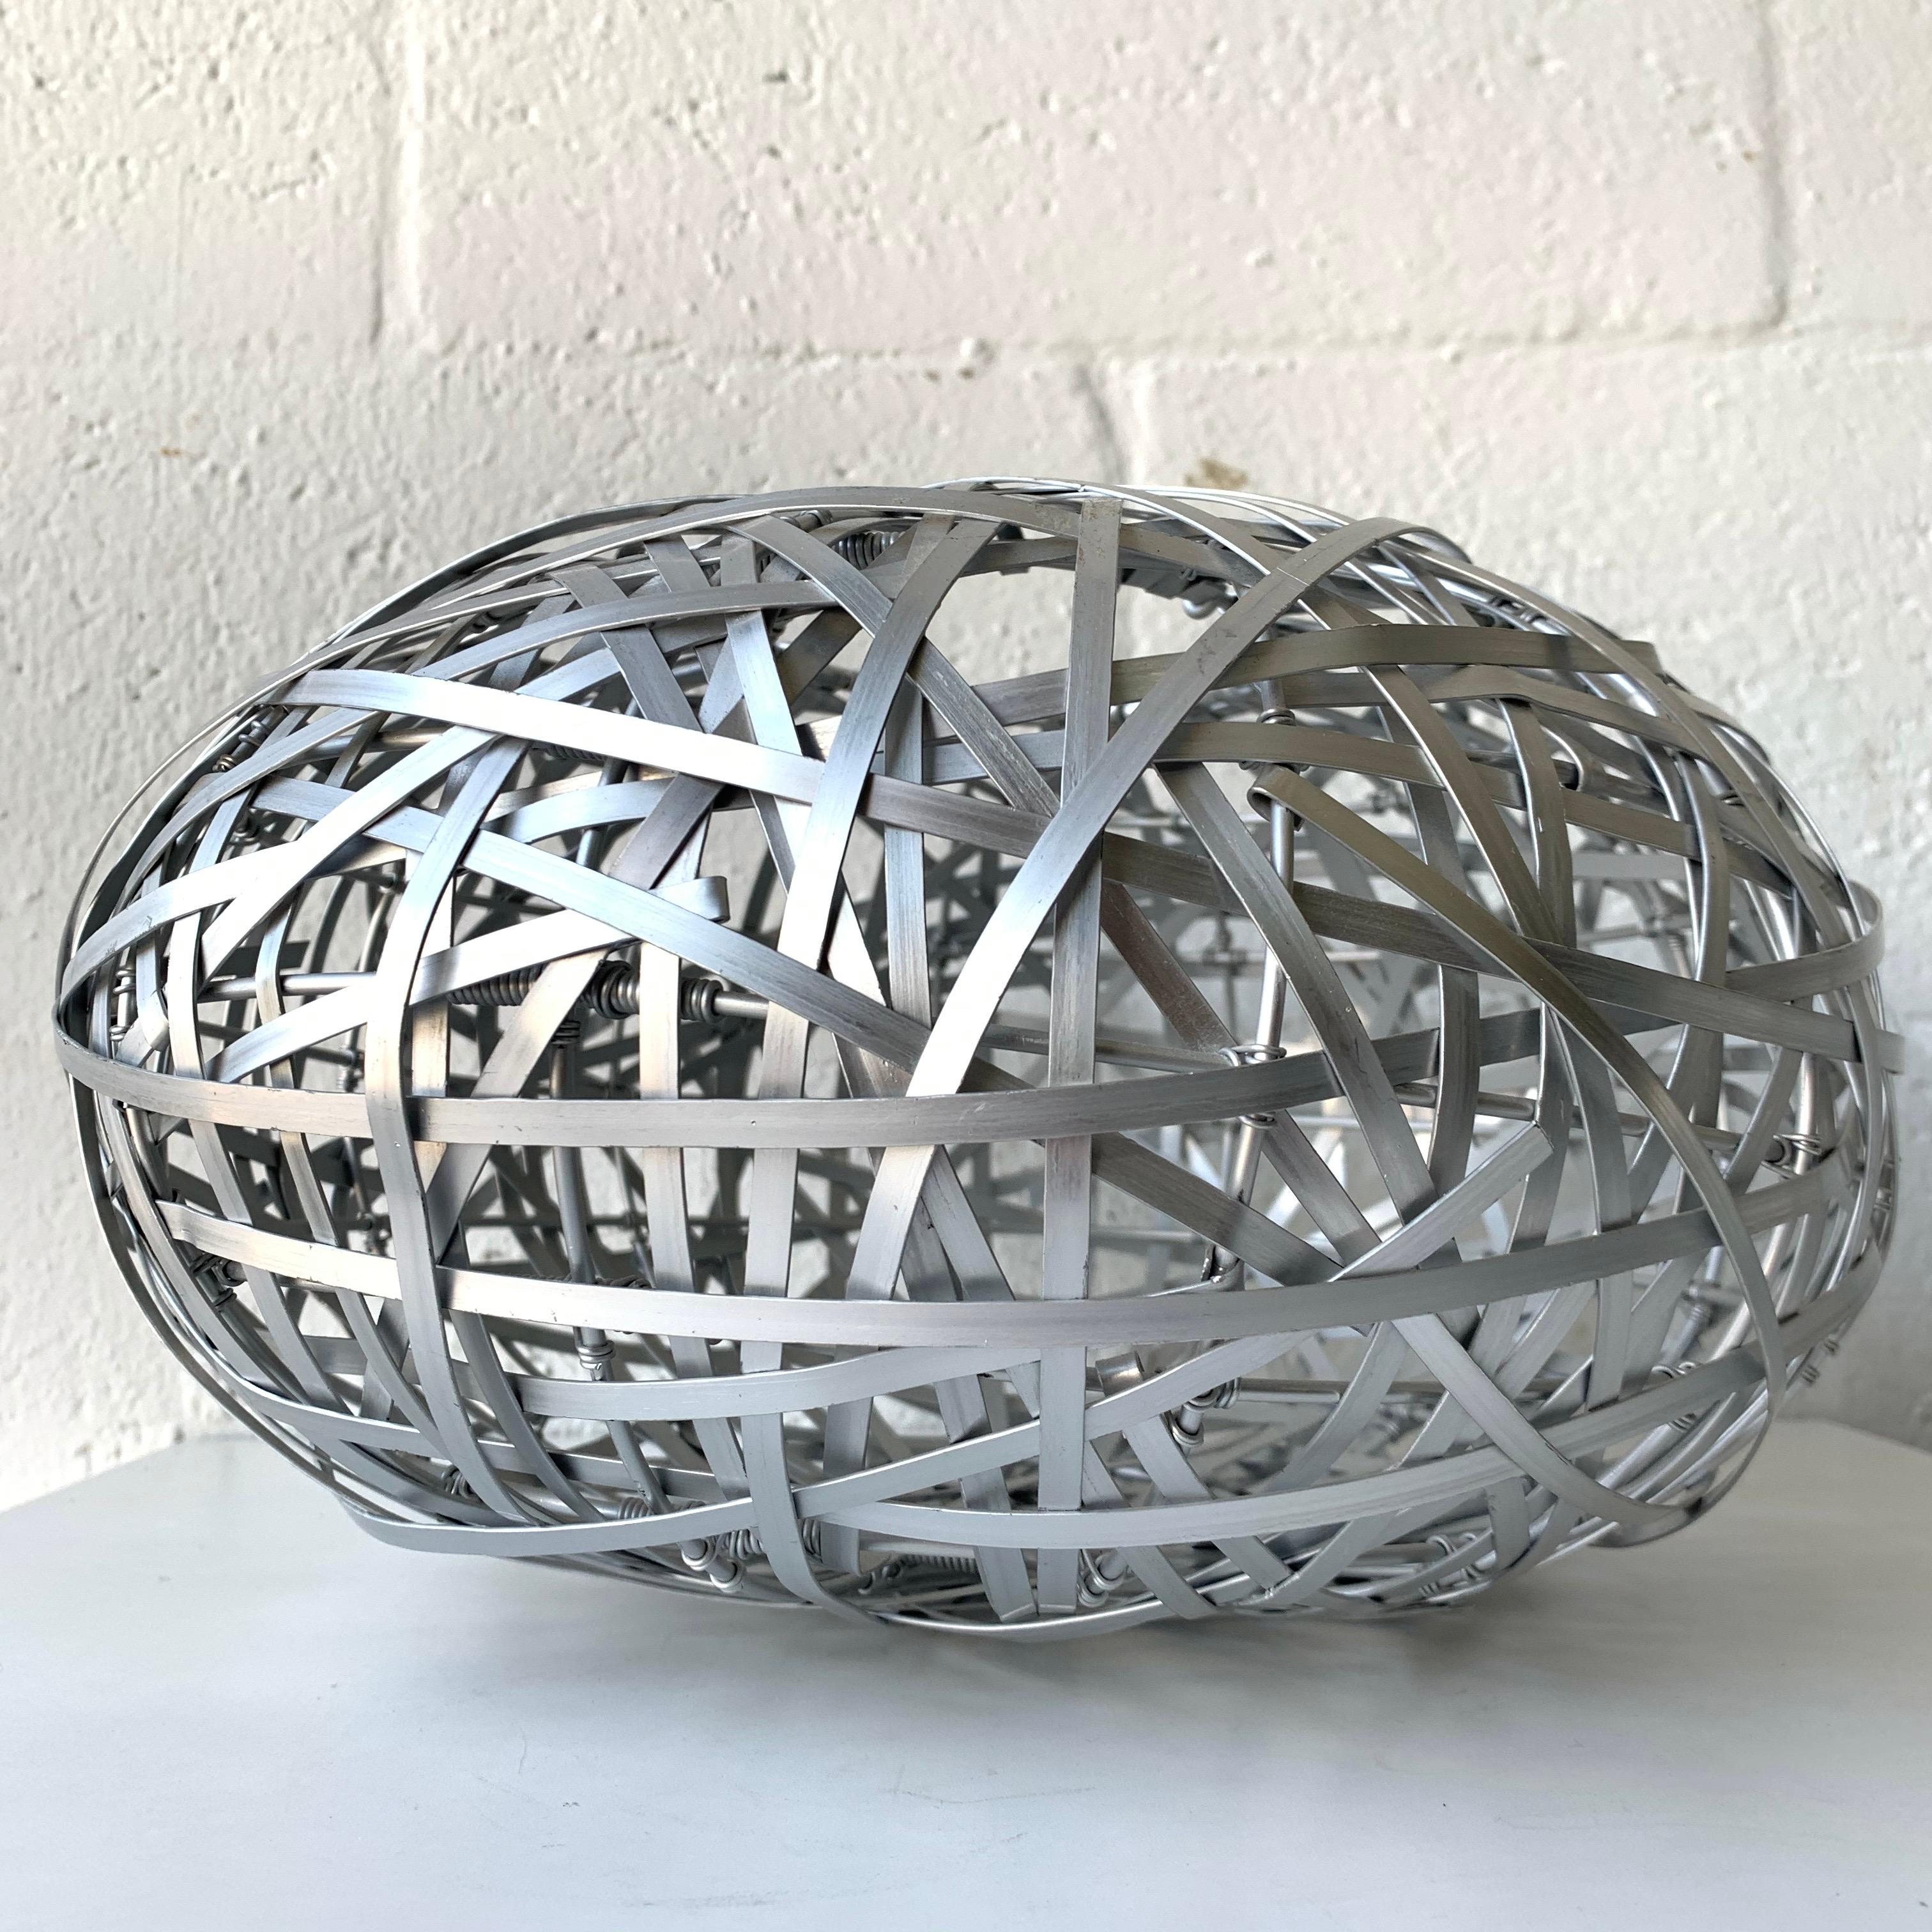 Brazilian Modern Sculptural Woven Aluminum Basket Attributed to Campana Brothers 2